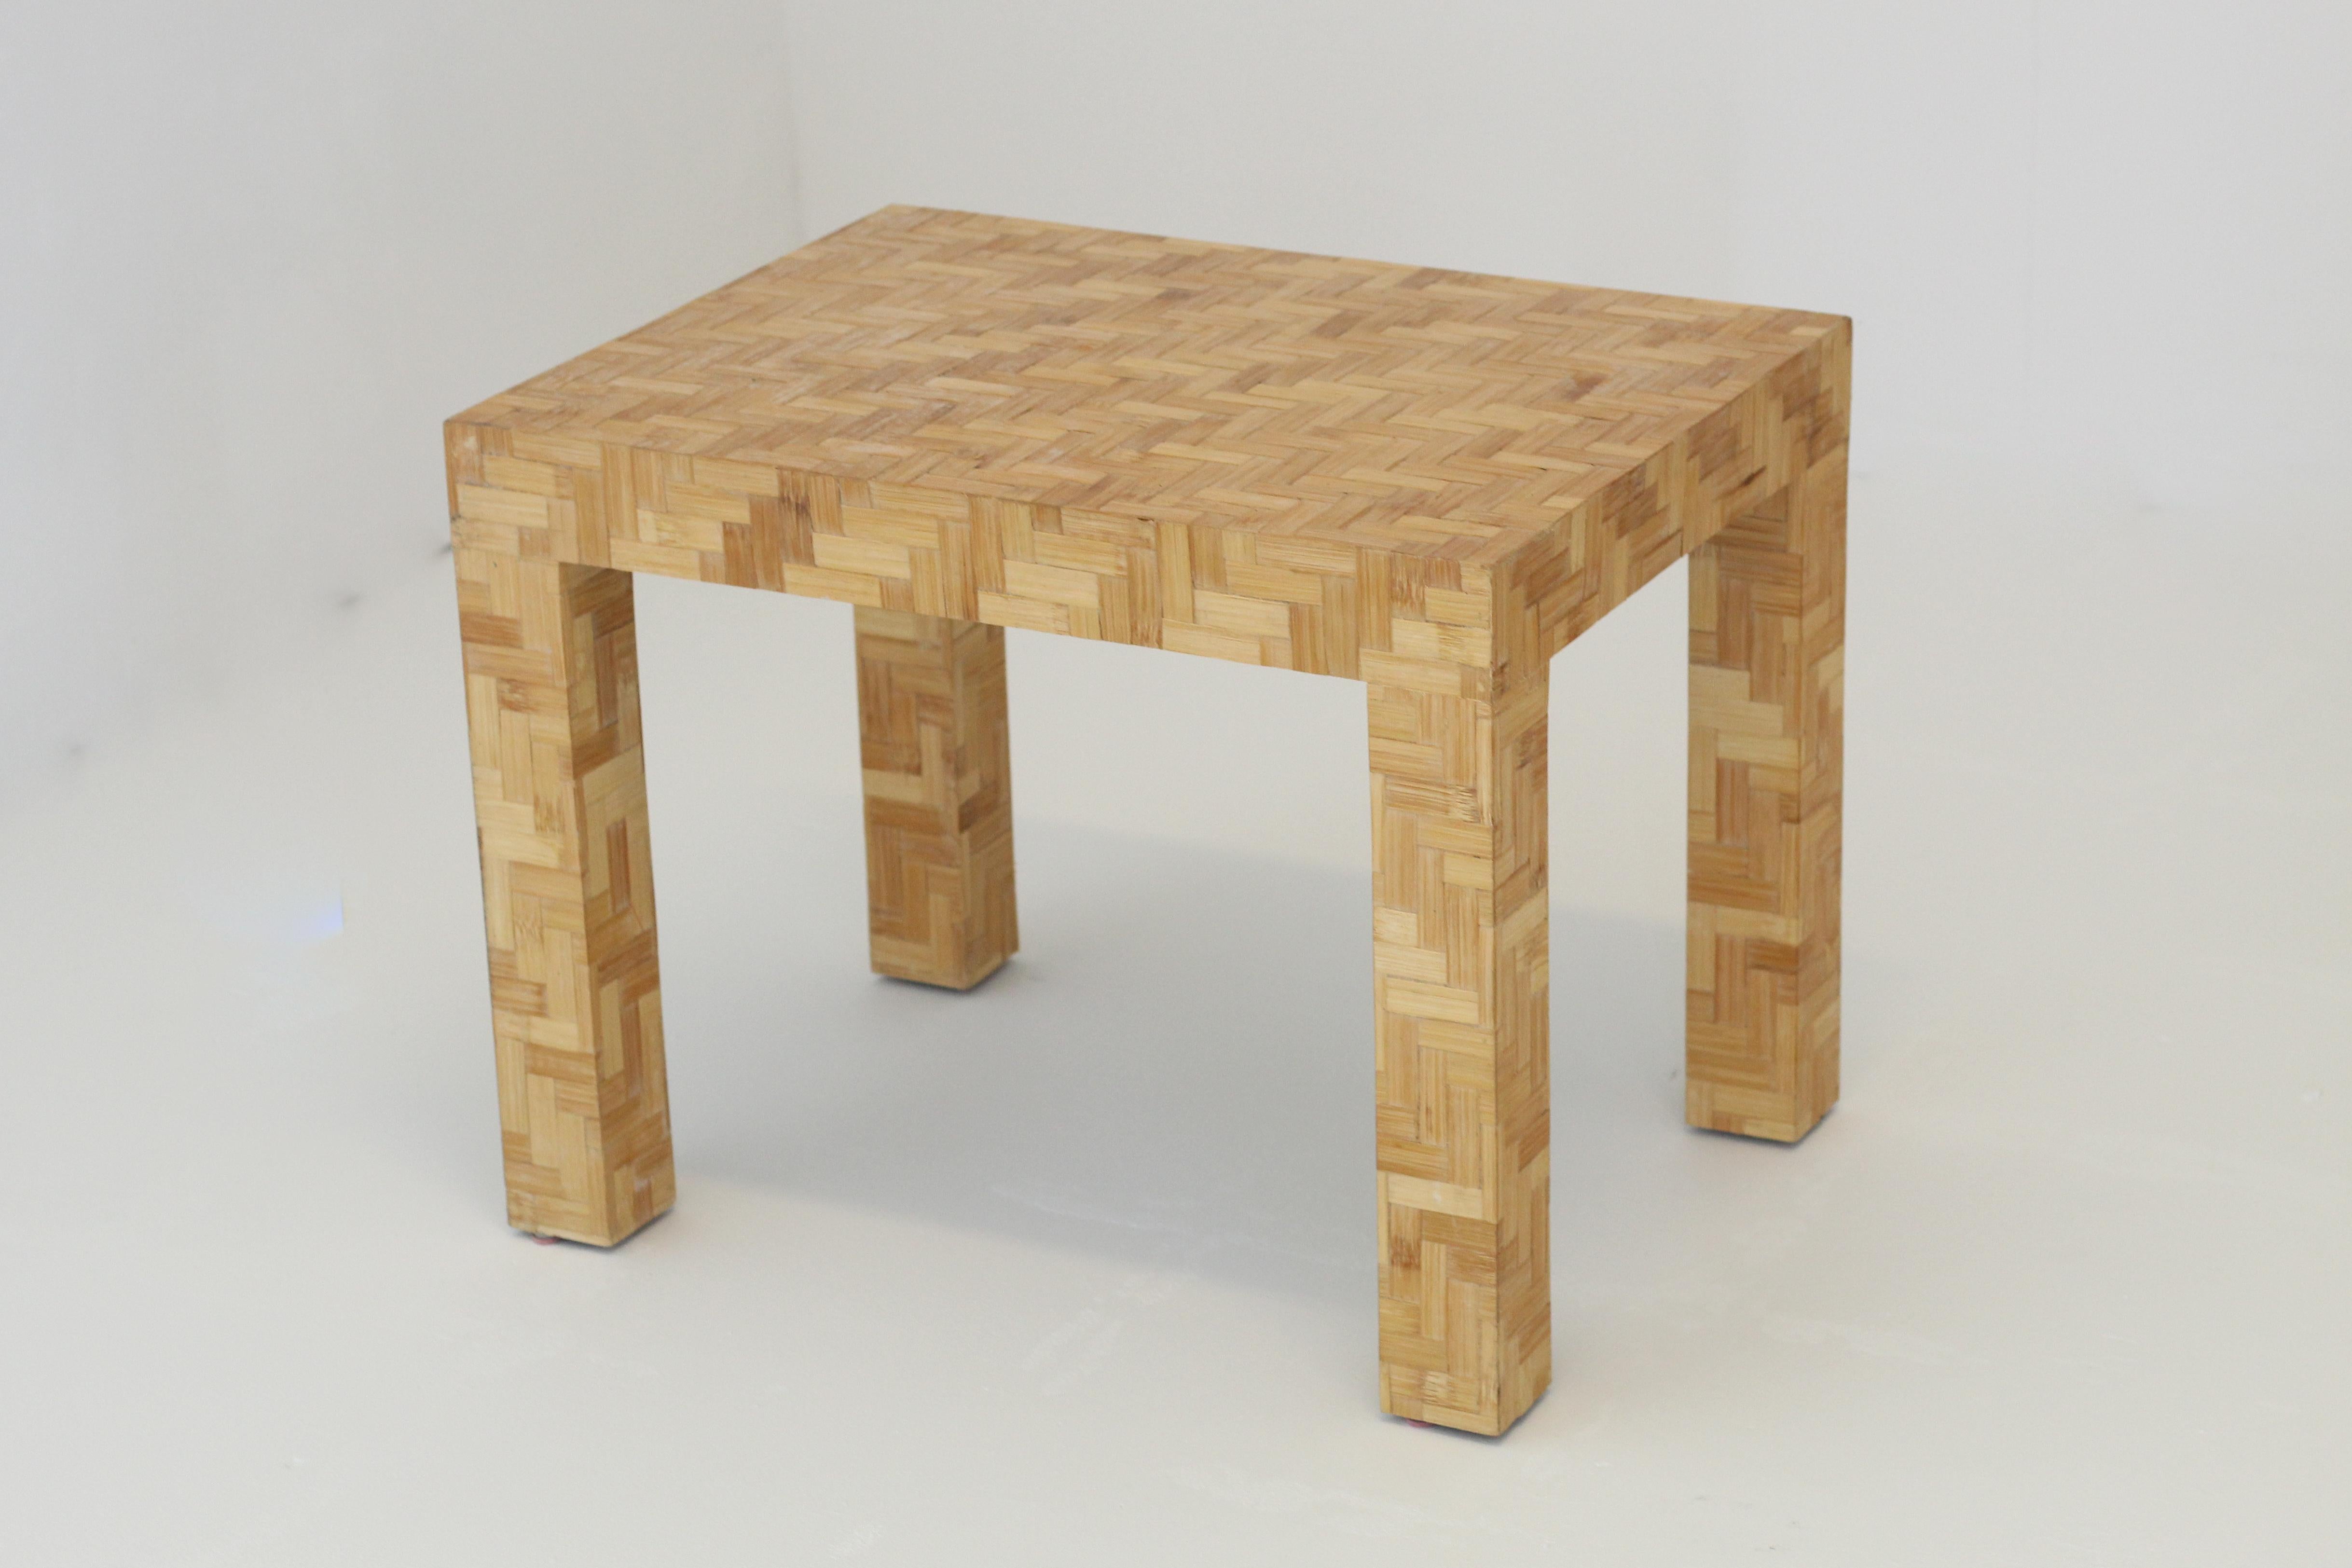 Excellent fully wrapped Parsons end table in intricate bamboo parquet design. In the style of Milo Baughman, Karl Springer and Steve Chase. Beautiful craftsmanship with top and legs wrapped, in original vintage condition. 

A classic and versatile